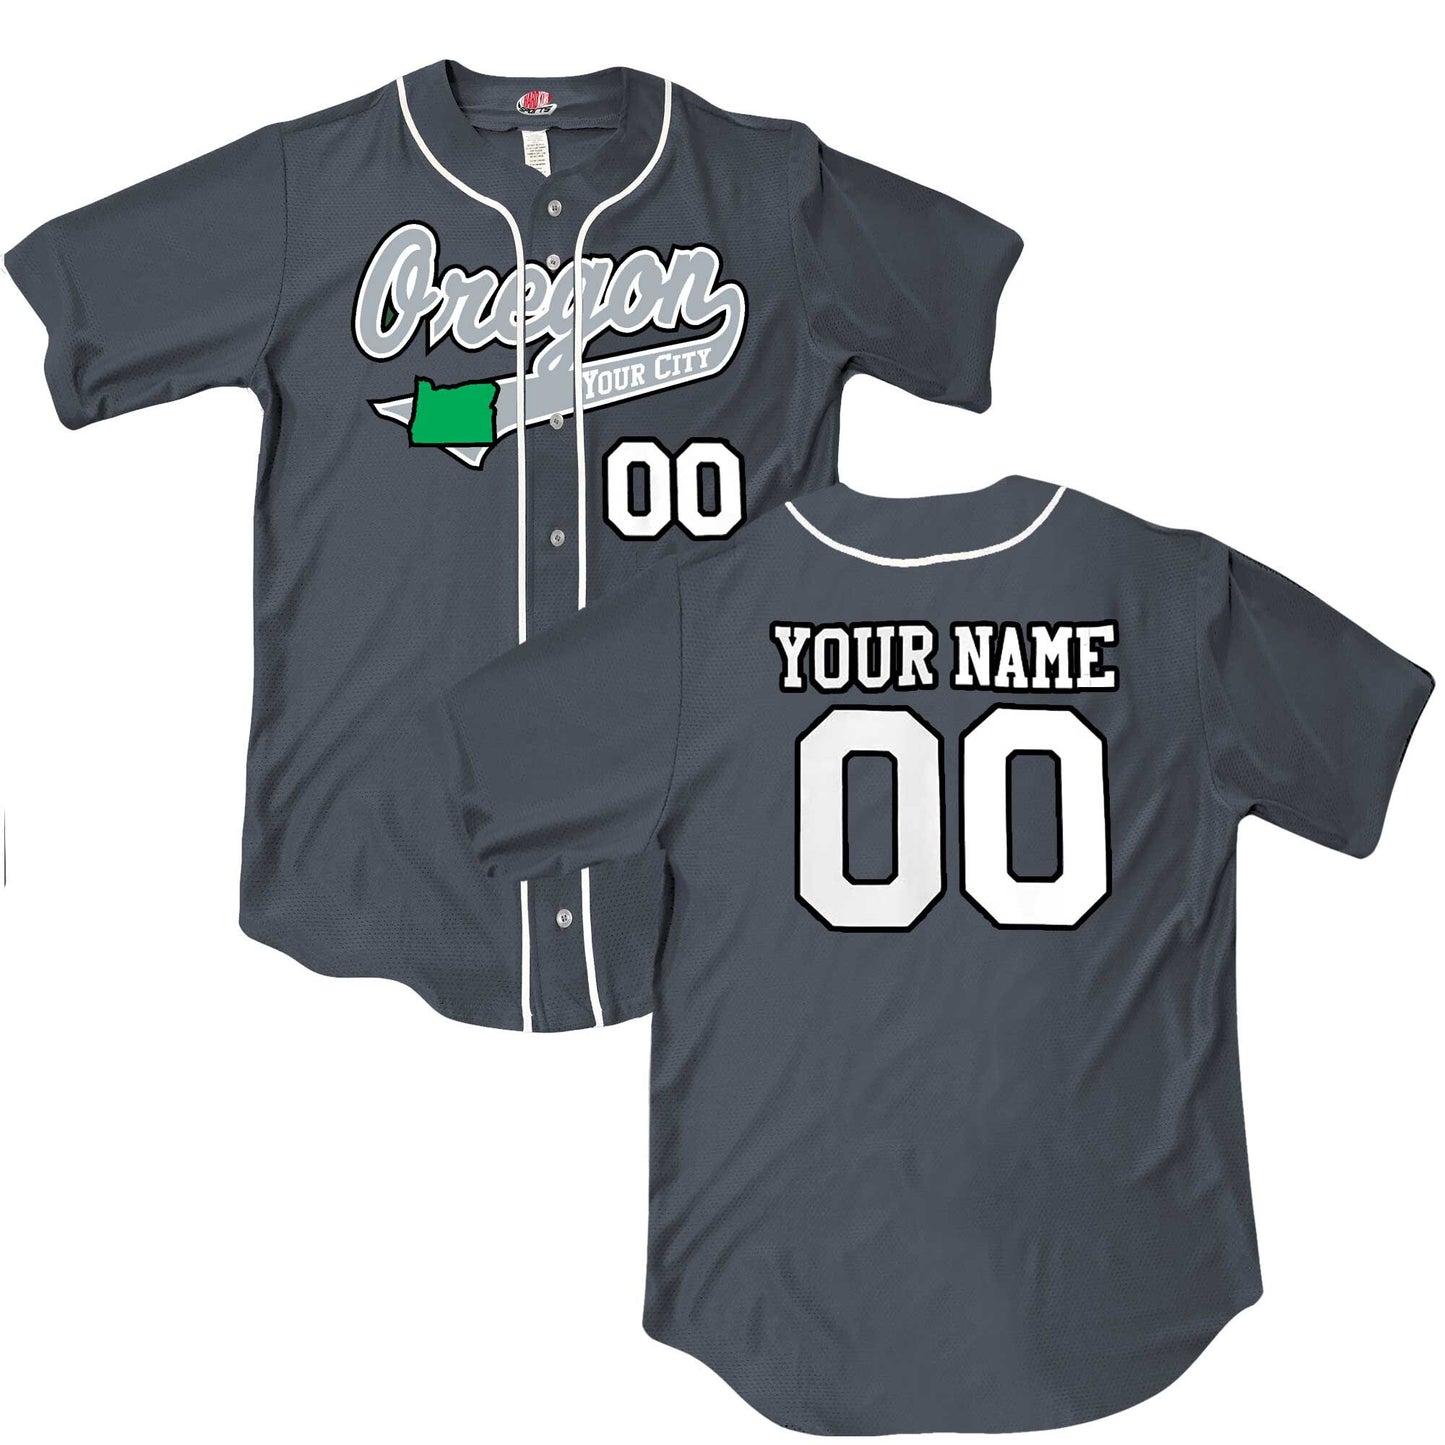 Custom Oregon Baseball Jersey, Dark Green or Graphite Grey, Personalized with Your City, Your Name and Numbers, Choice of Print Options